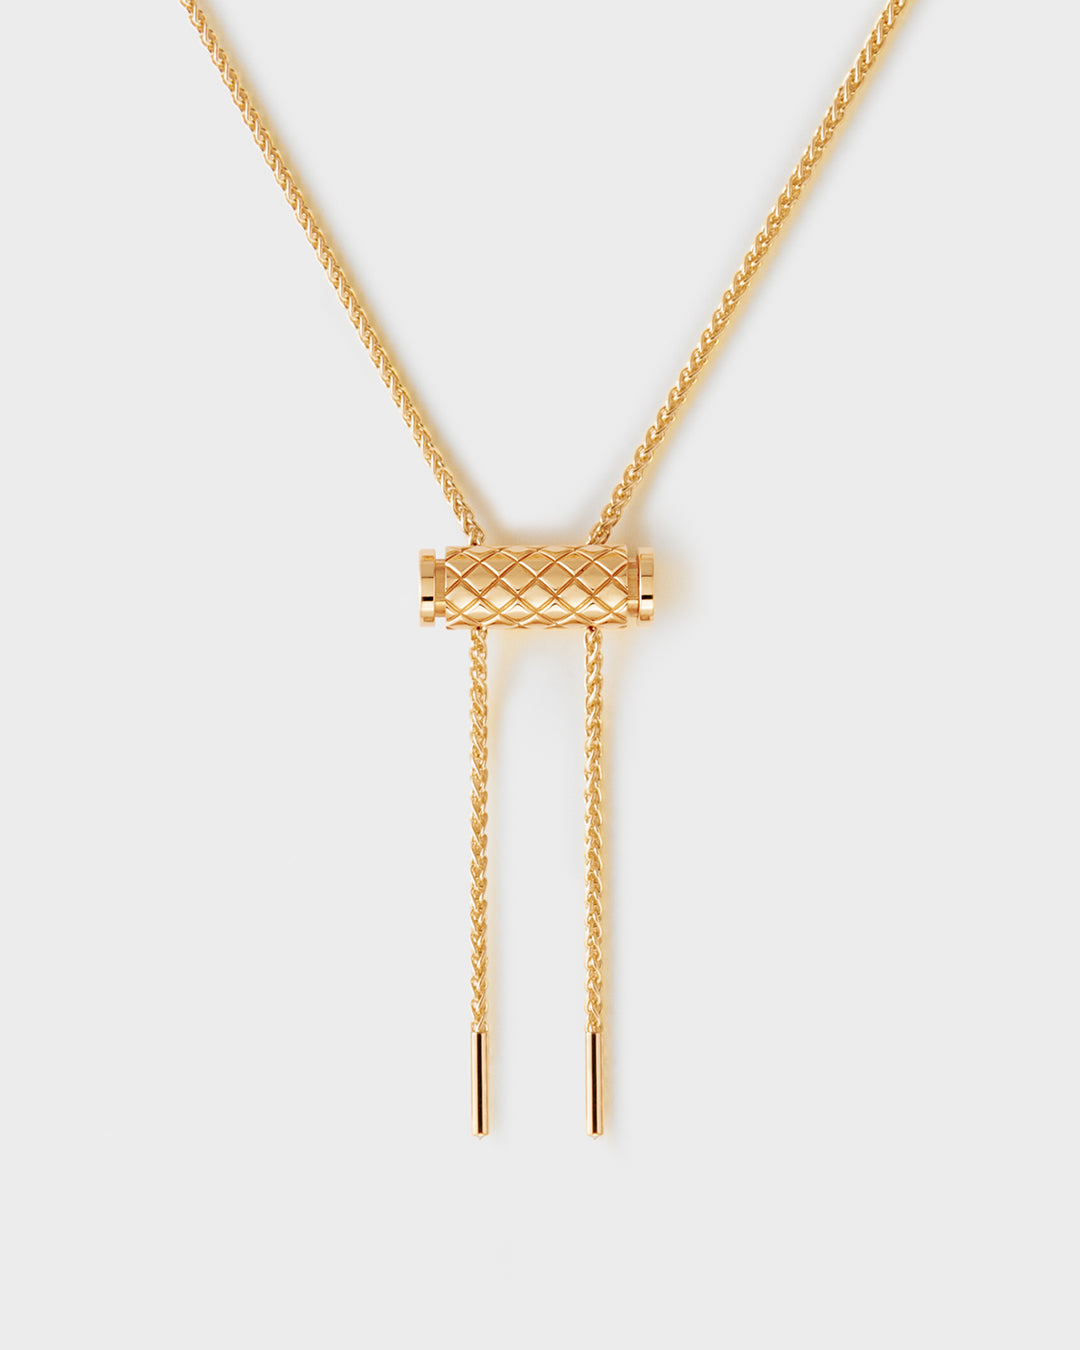 Gold Latch Pendant on MM Chain in Yellow Gold - 1 - Nouvel Heritage